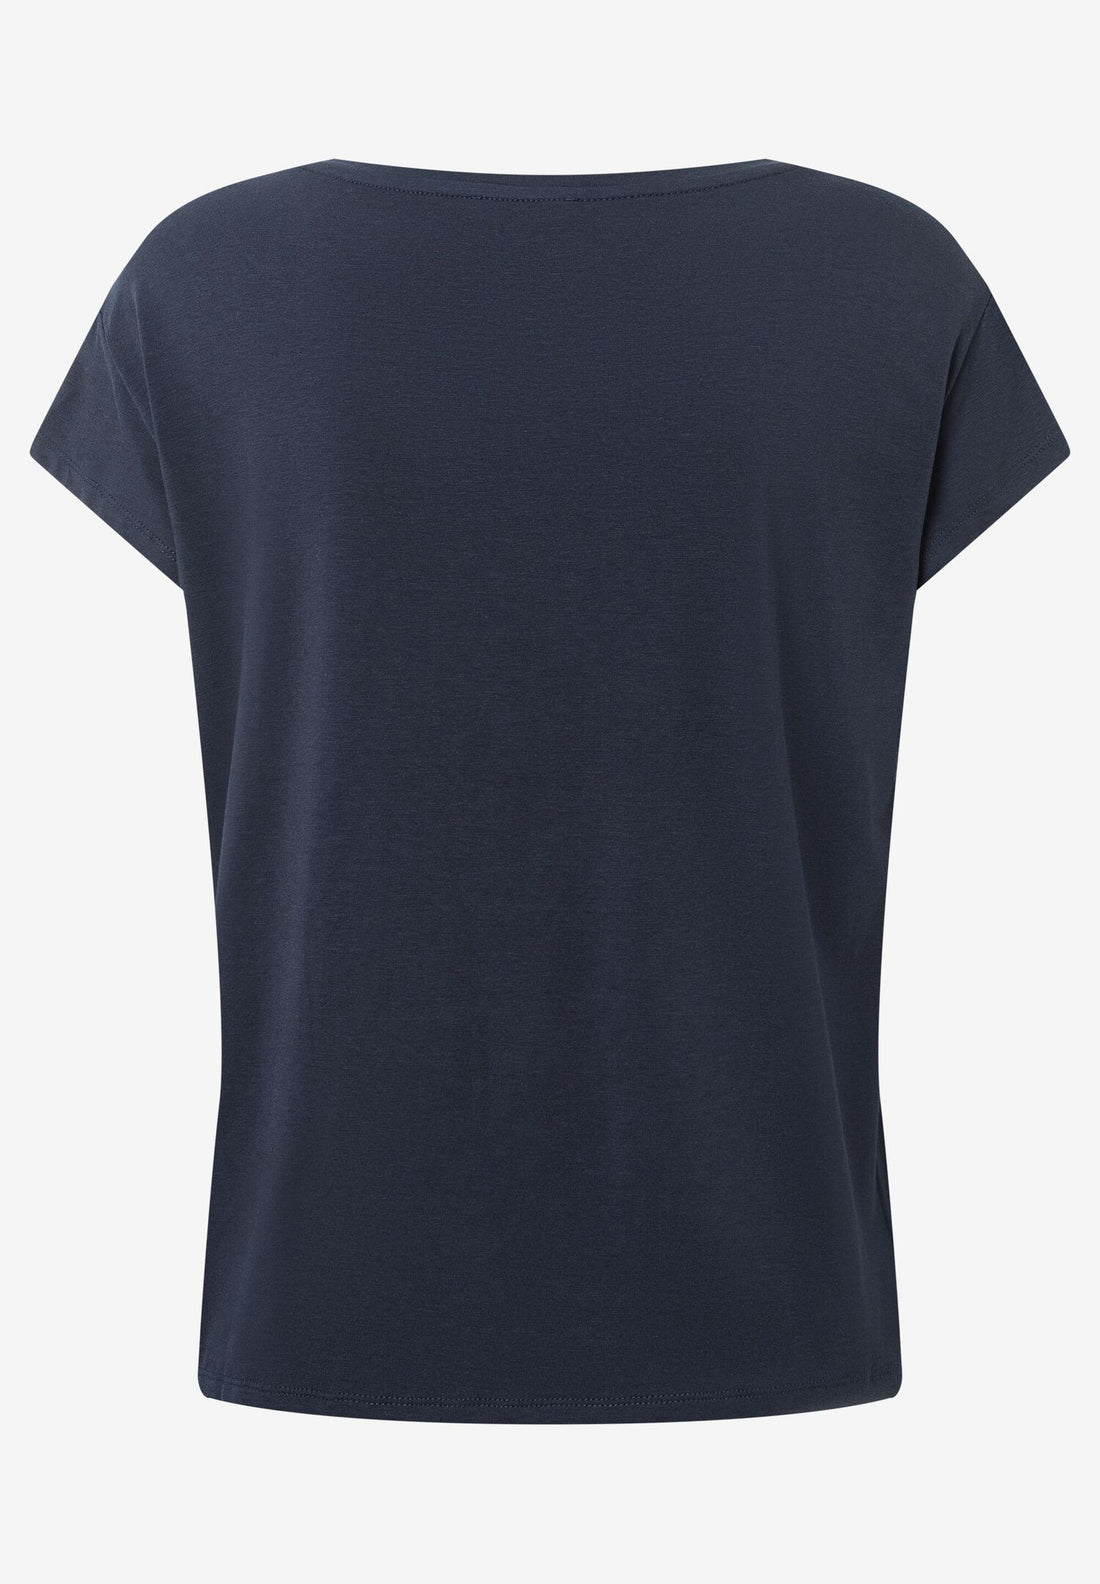 Blue Short Sleeve Navy T-Shirt With Lettering_02